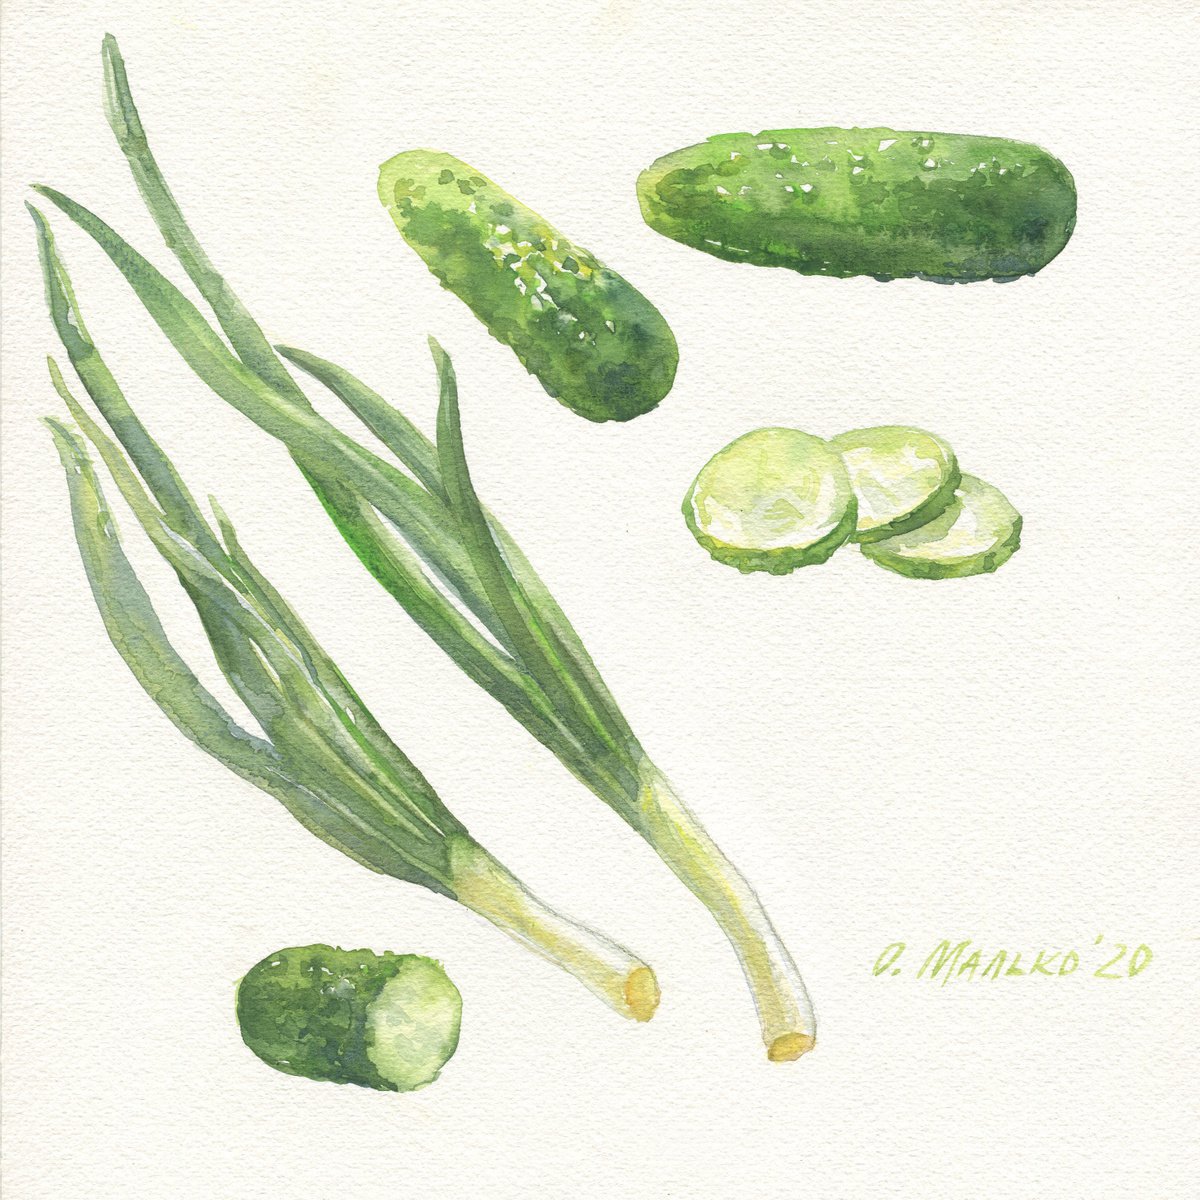 Veggies 1. Cucumbers and green onion / Original kitchen watercolor Vegetables on a white b... by Olha Malko